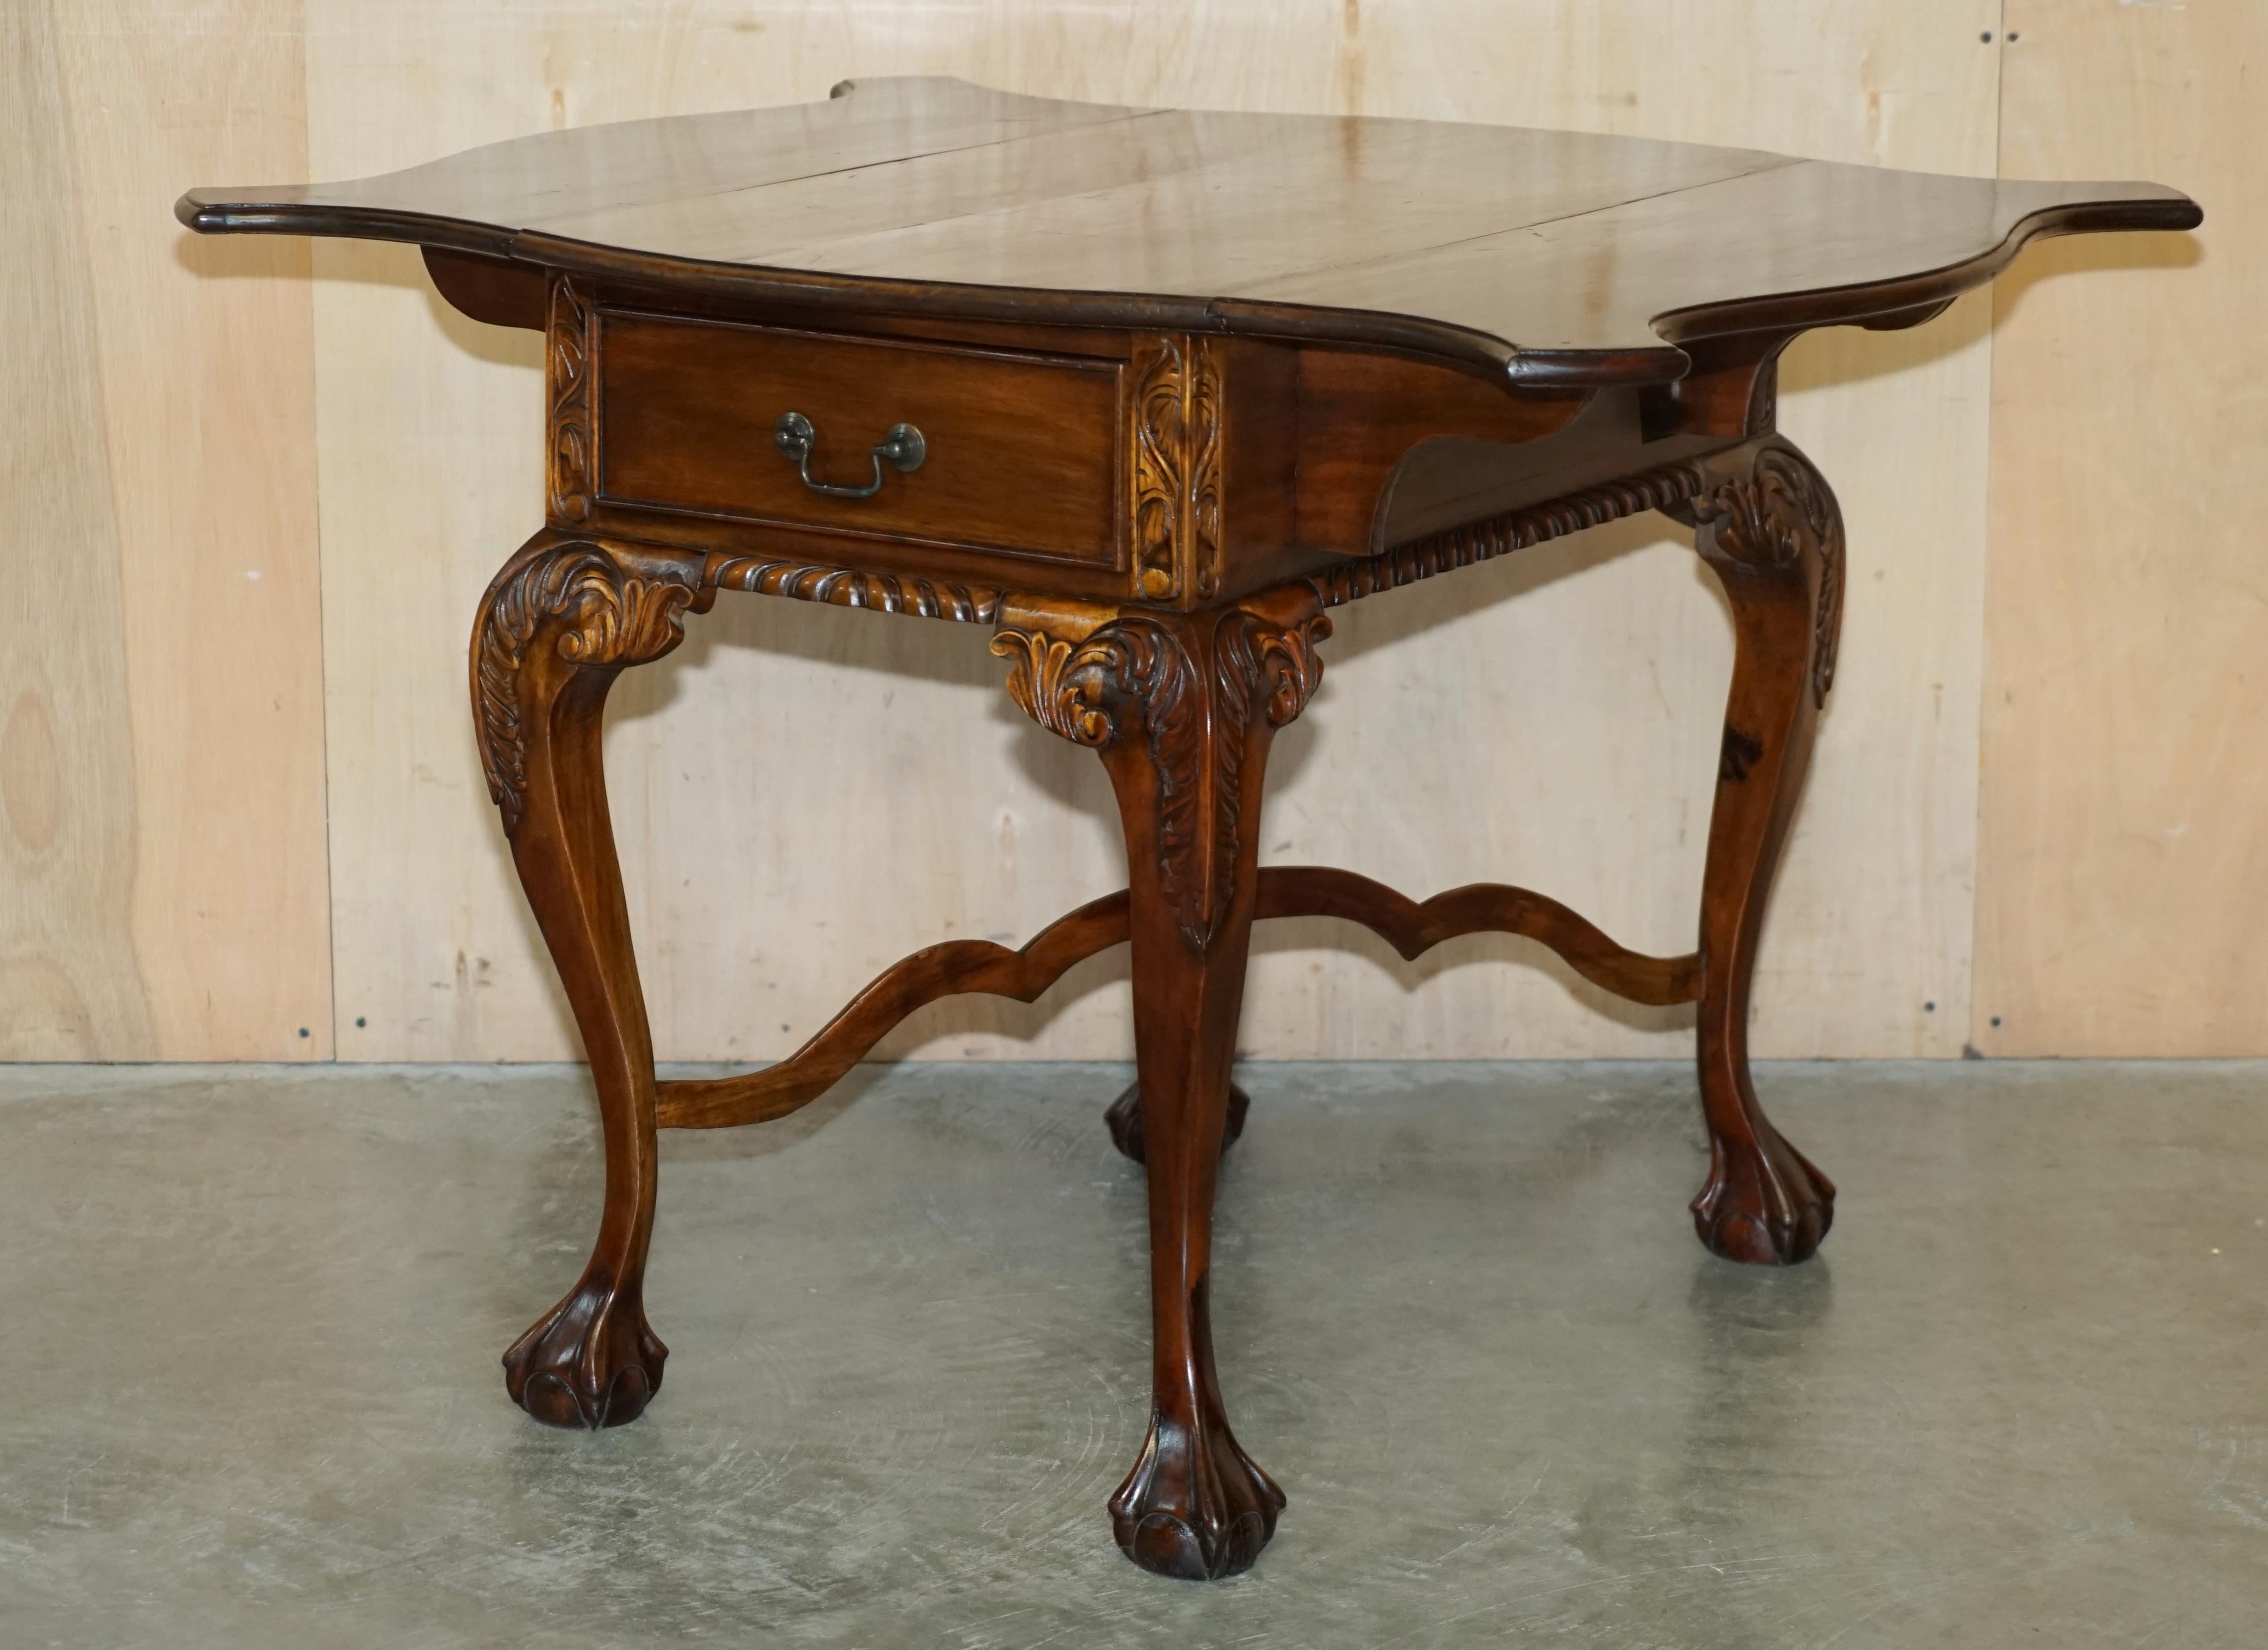 EXQUISITE THOMAS CHIPPENDALE STYLE CLAW & BALL FEET EXTENDiNG CHESS BOARD TABLE For Sale 1